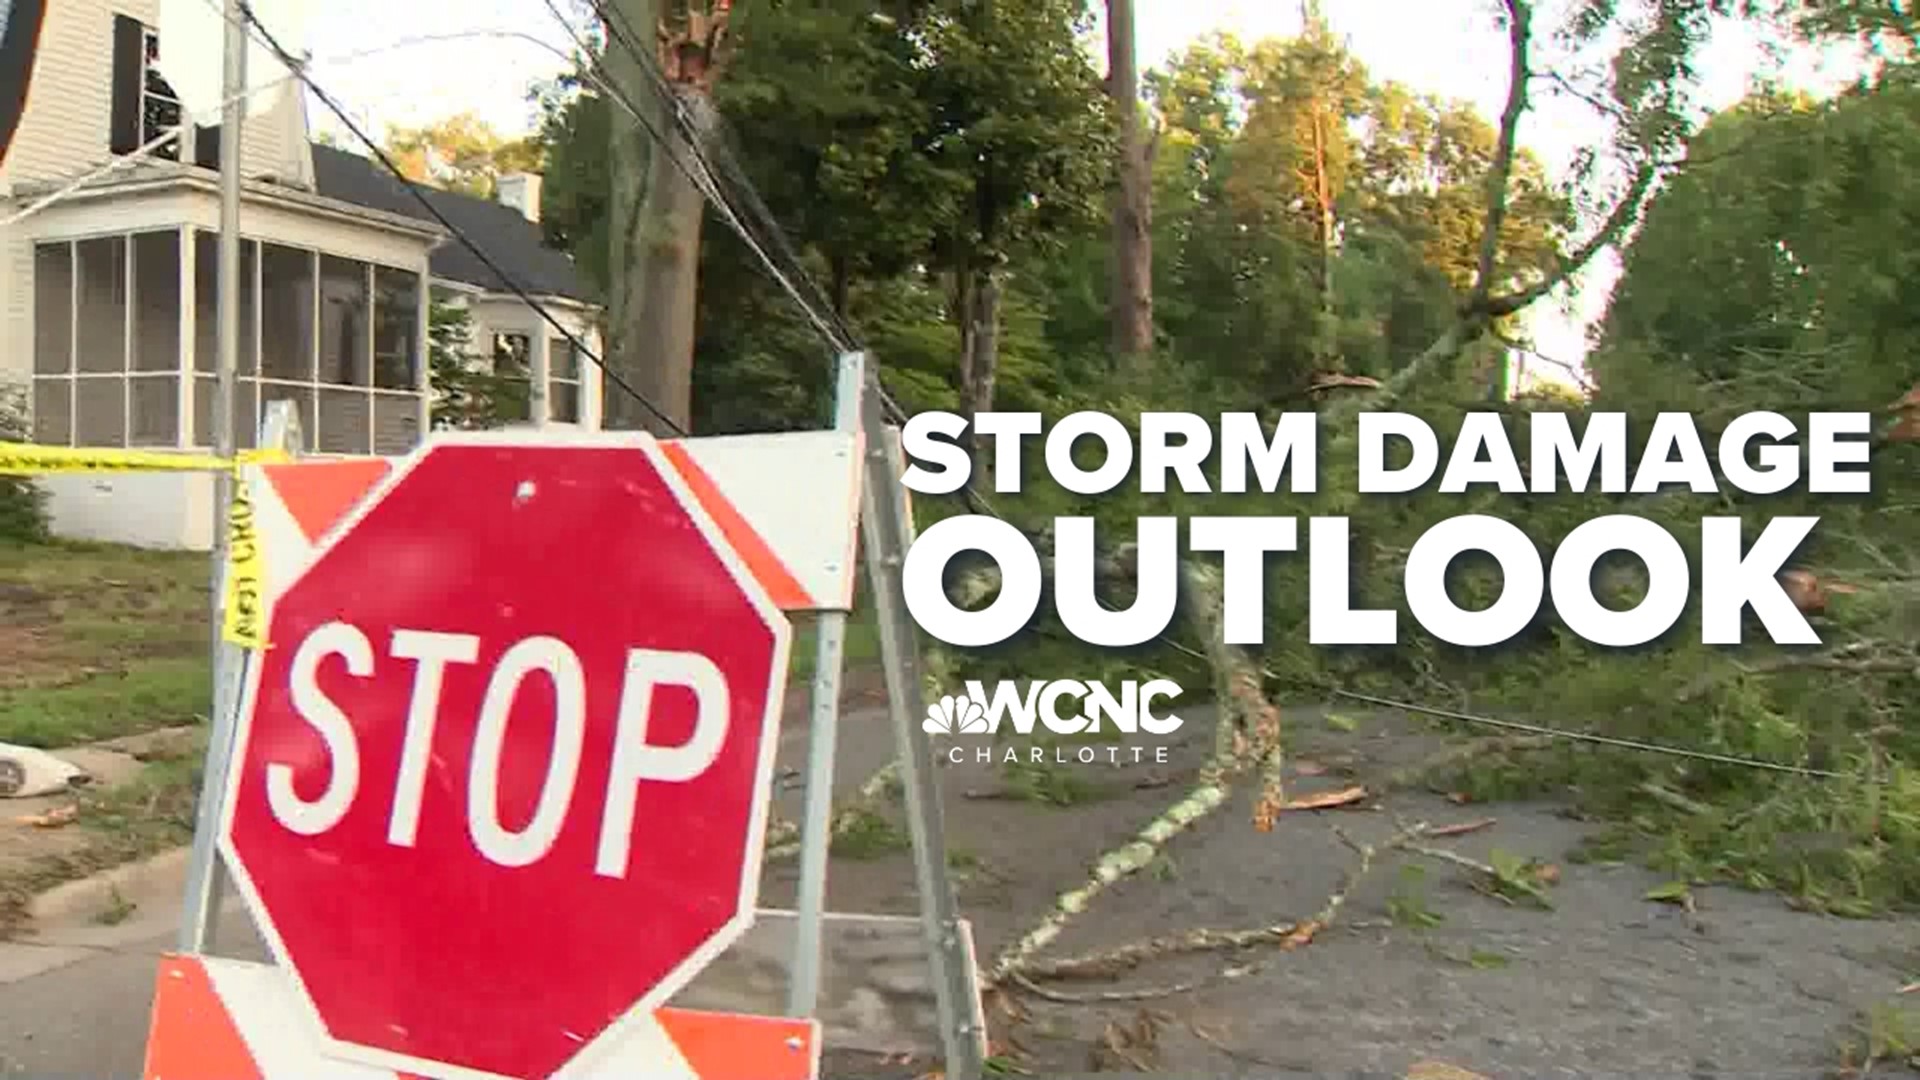 The NWS confirmed an EF0 tornado touched down in northern Mecklenburg County.